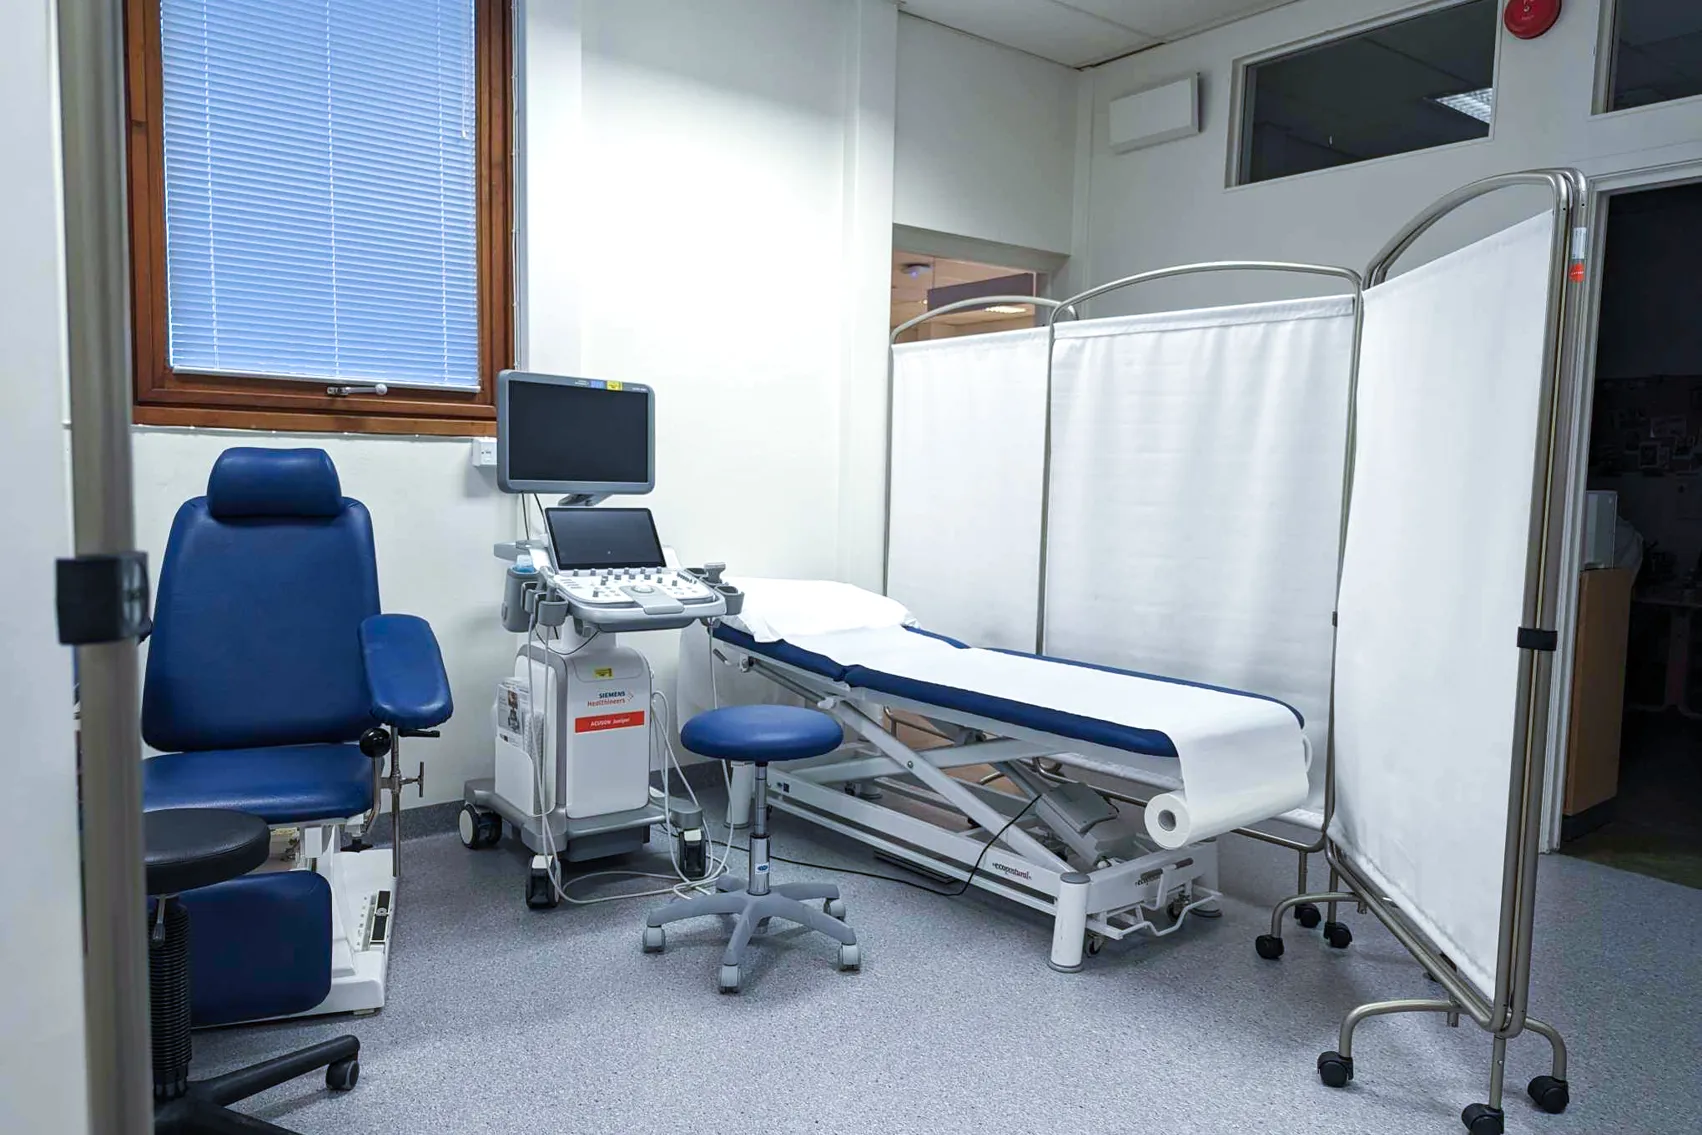 A hospital room with a bed and medical equipment